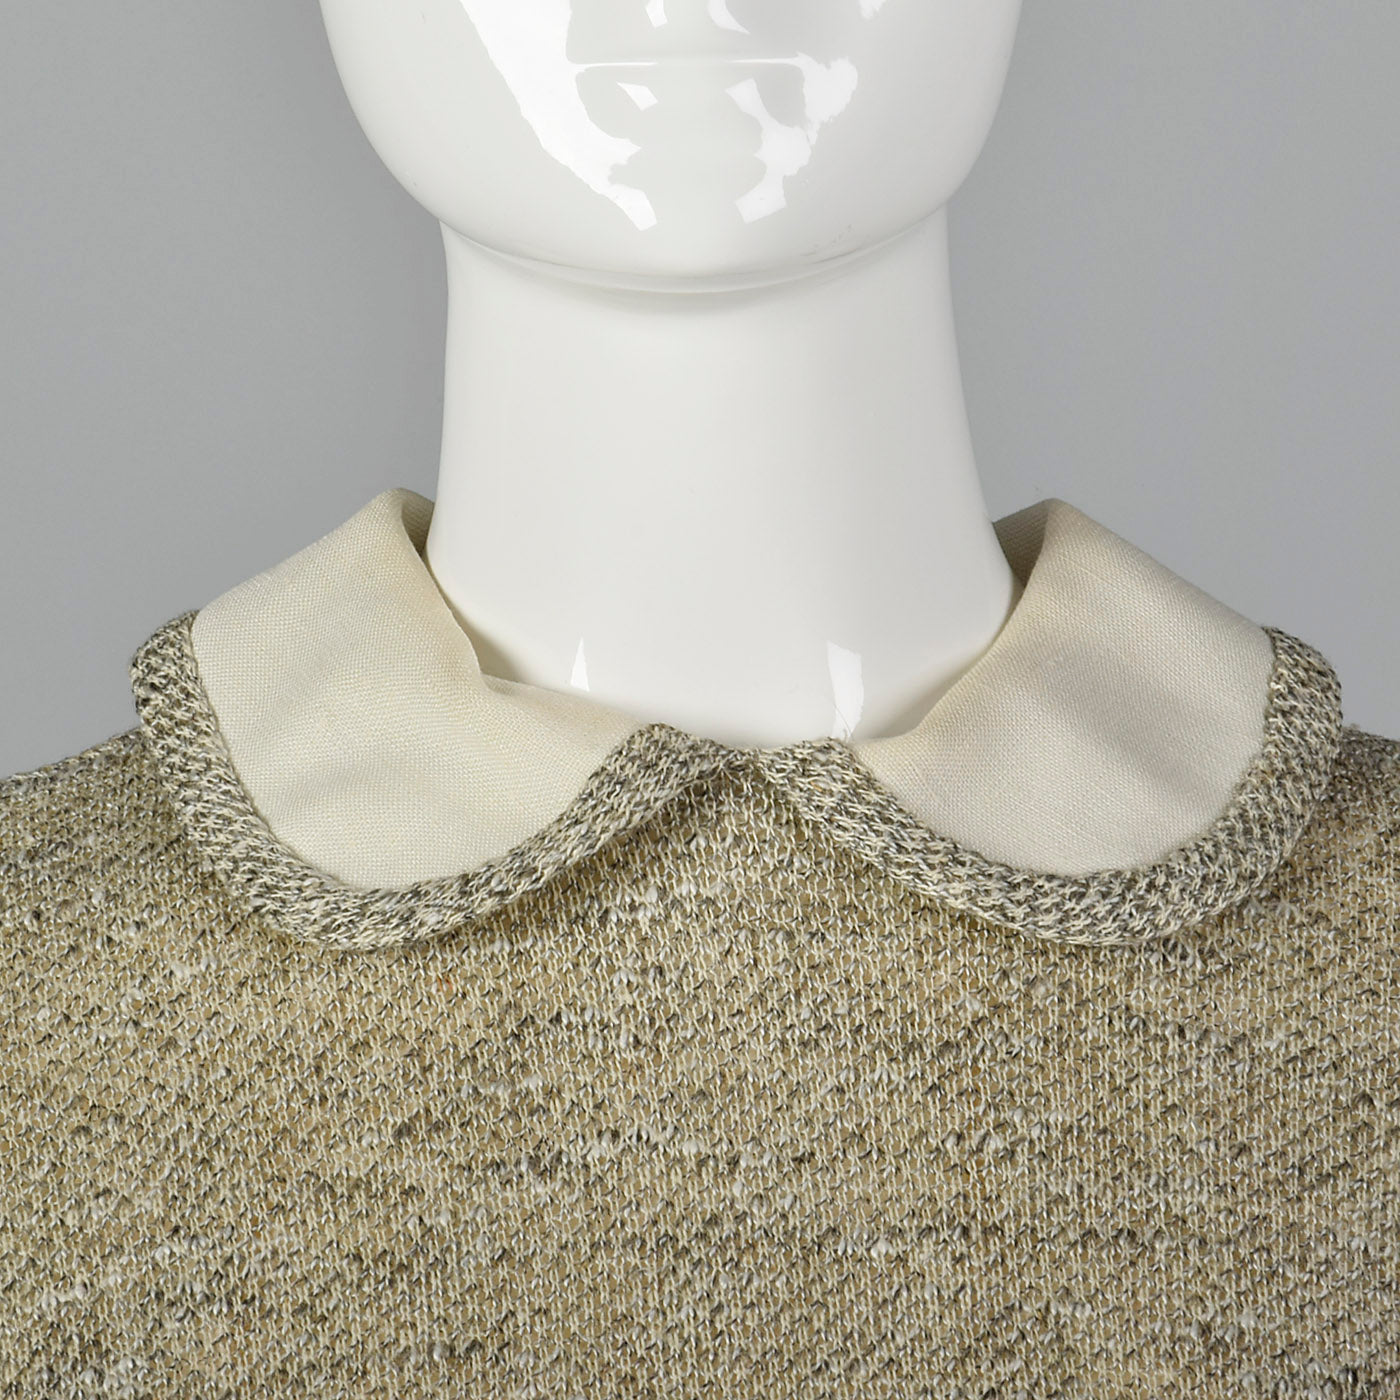 Small Anne Fogarty 1960s Gray Heathered Knit Dress